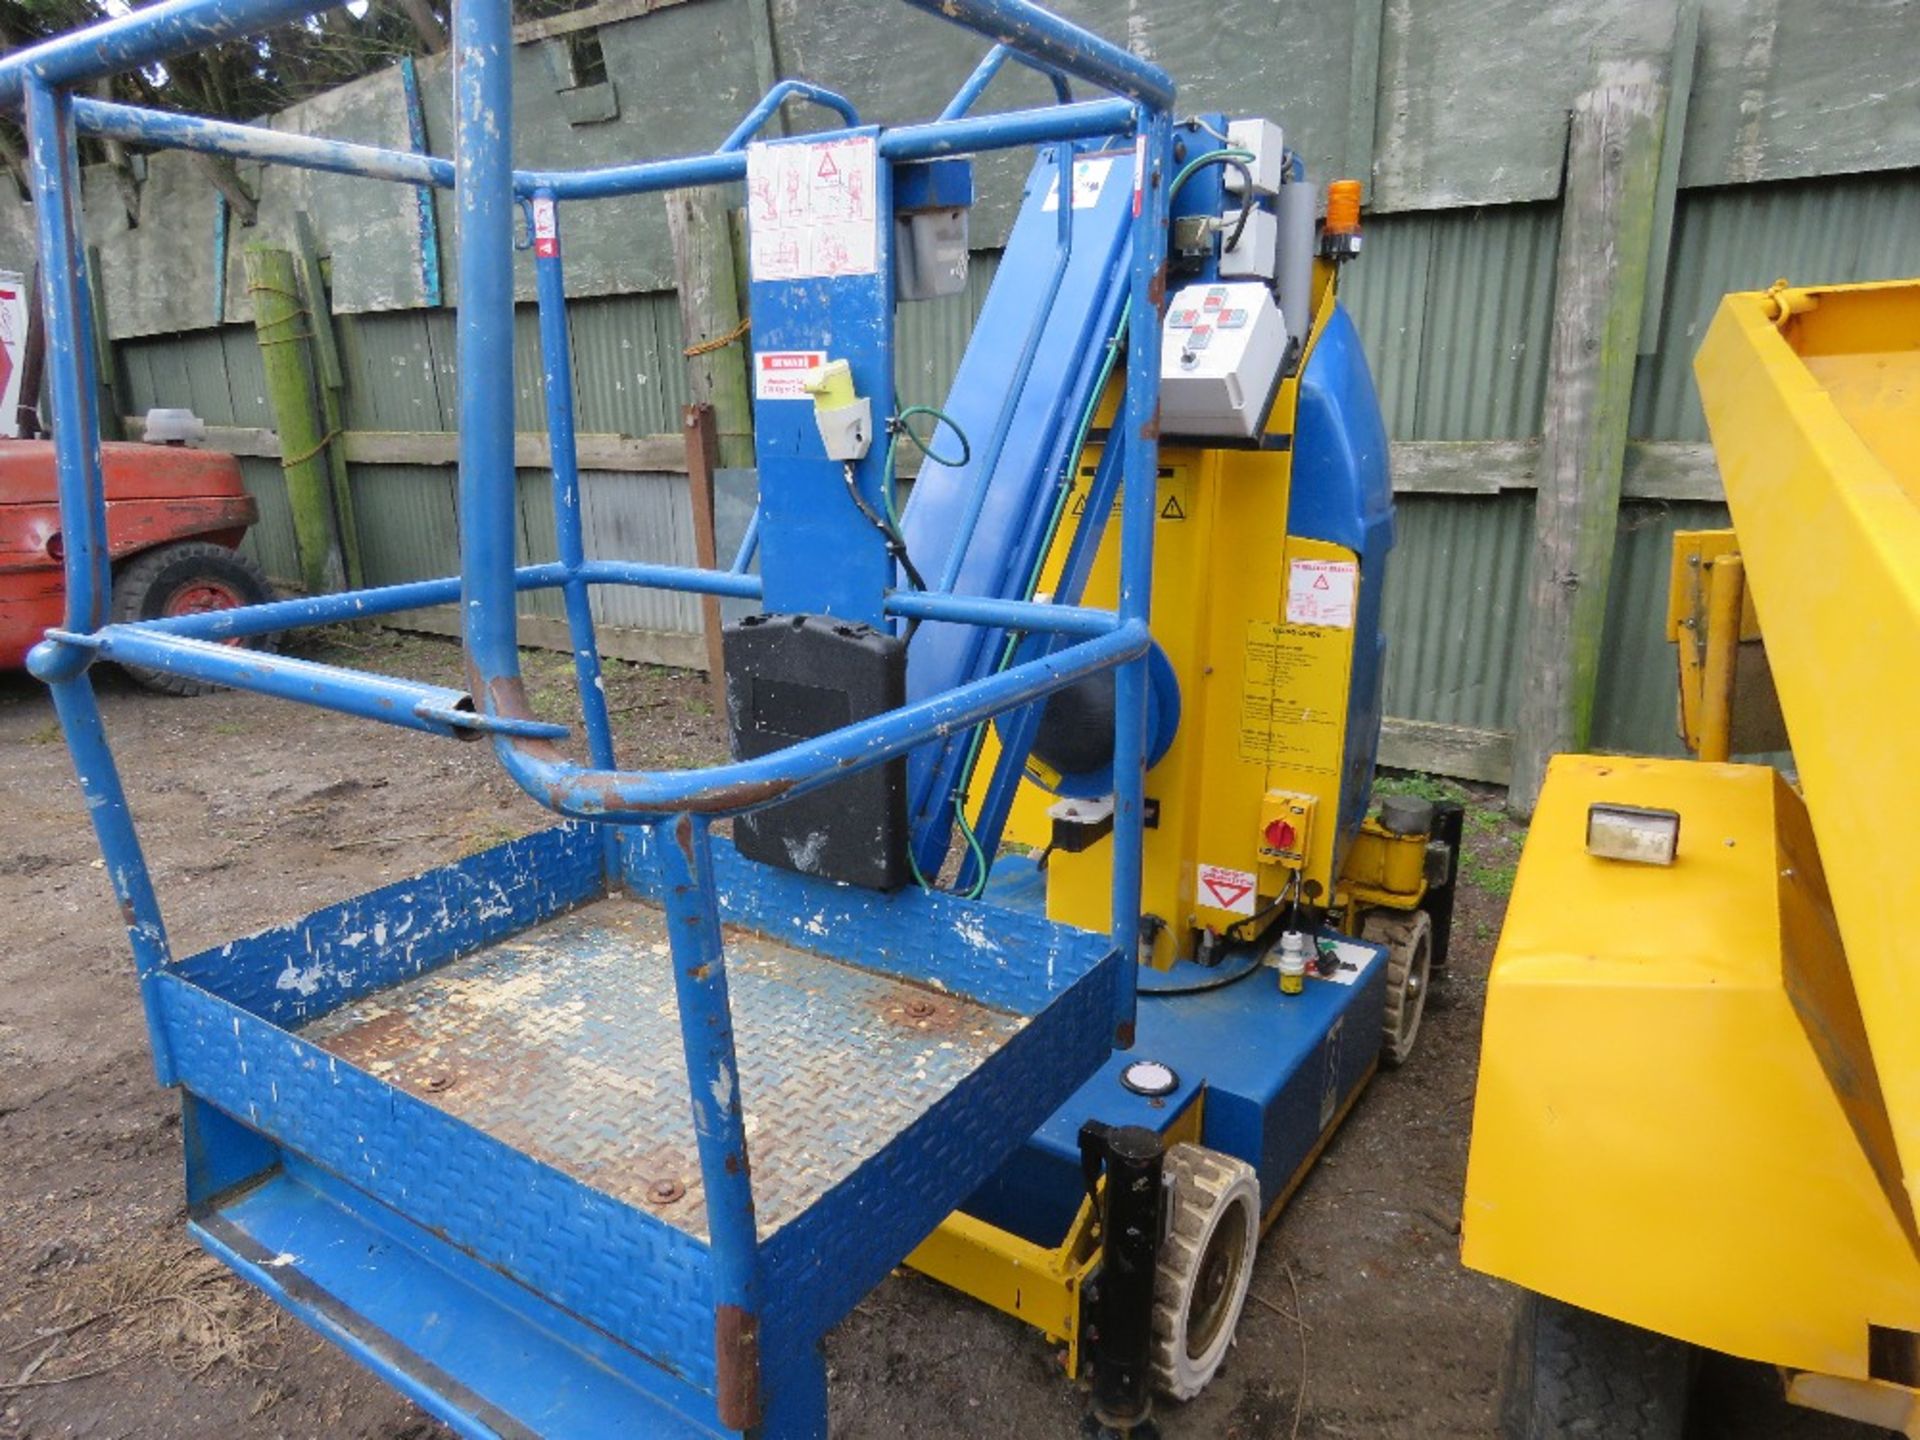 ABM ORION 1000 SELF PROPELLED 10 METRE MAST ACCESS LIFT UNIT WITH OUTRIGGERS YEAR 2001. SN:011006118 - Image 4 of 12